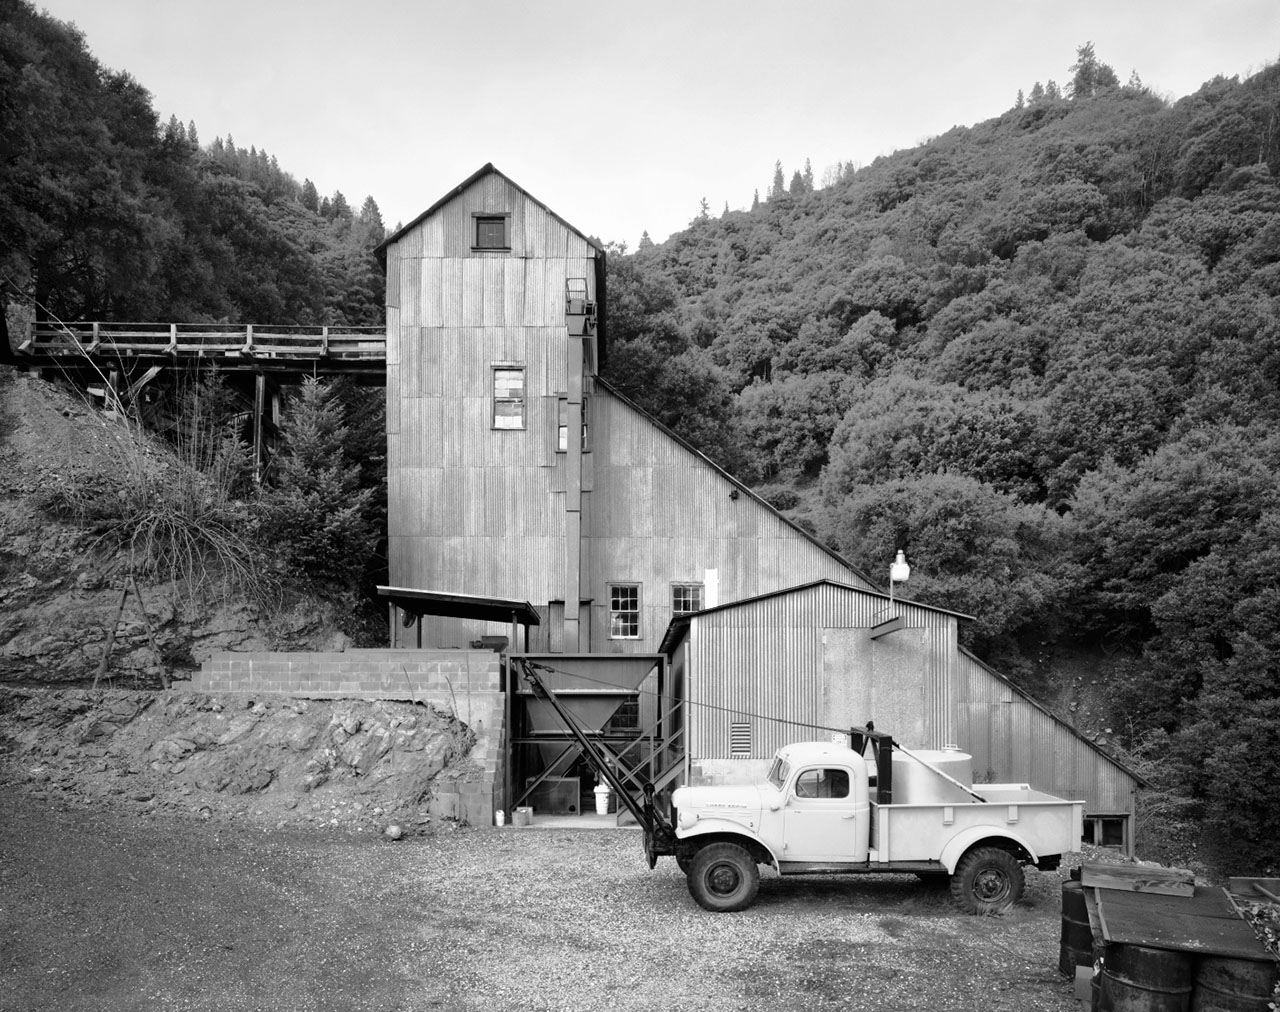 Oriental Mine Stamp Mill near Alleghany, from David Stark Wilson's photography book Structures of Utility